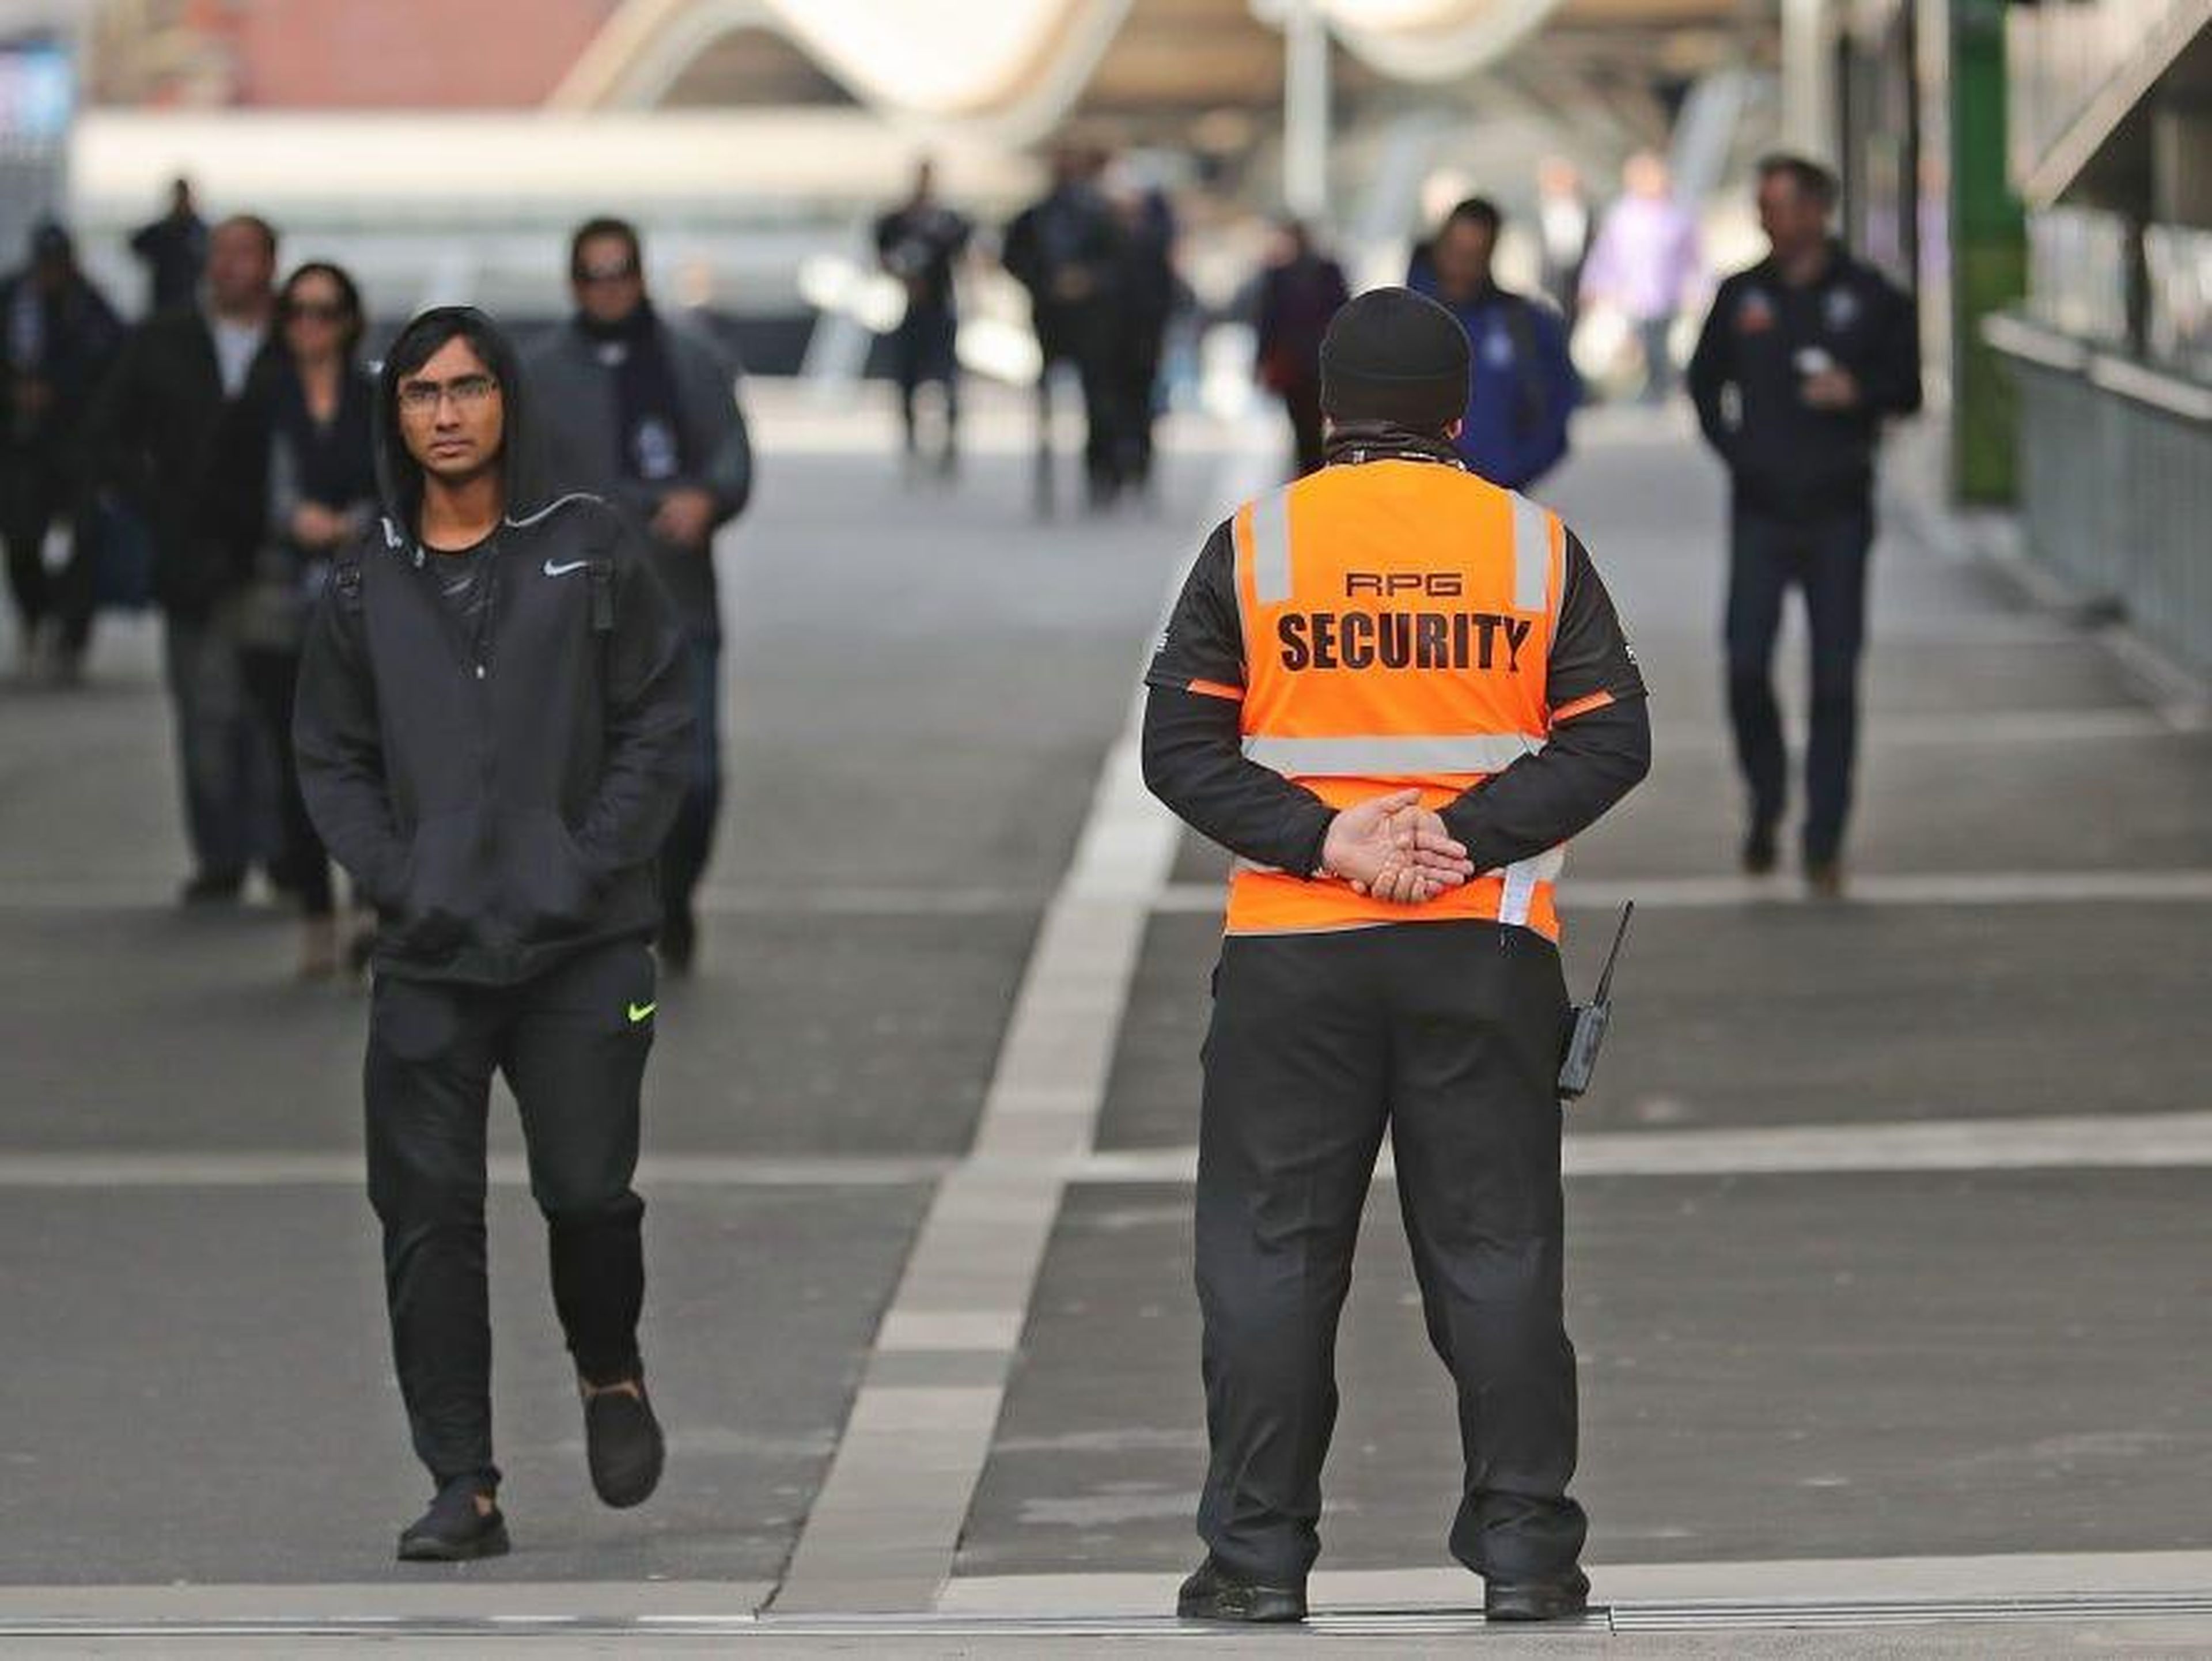 4. Security workers' positions for events like concerts and sporting events depend on large public gatherings.